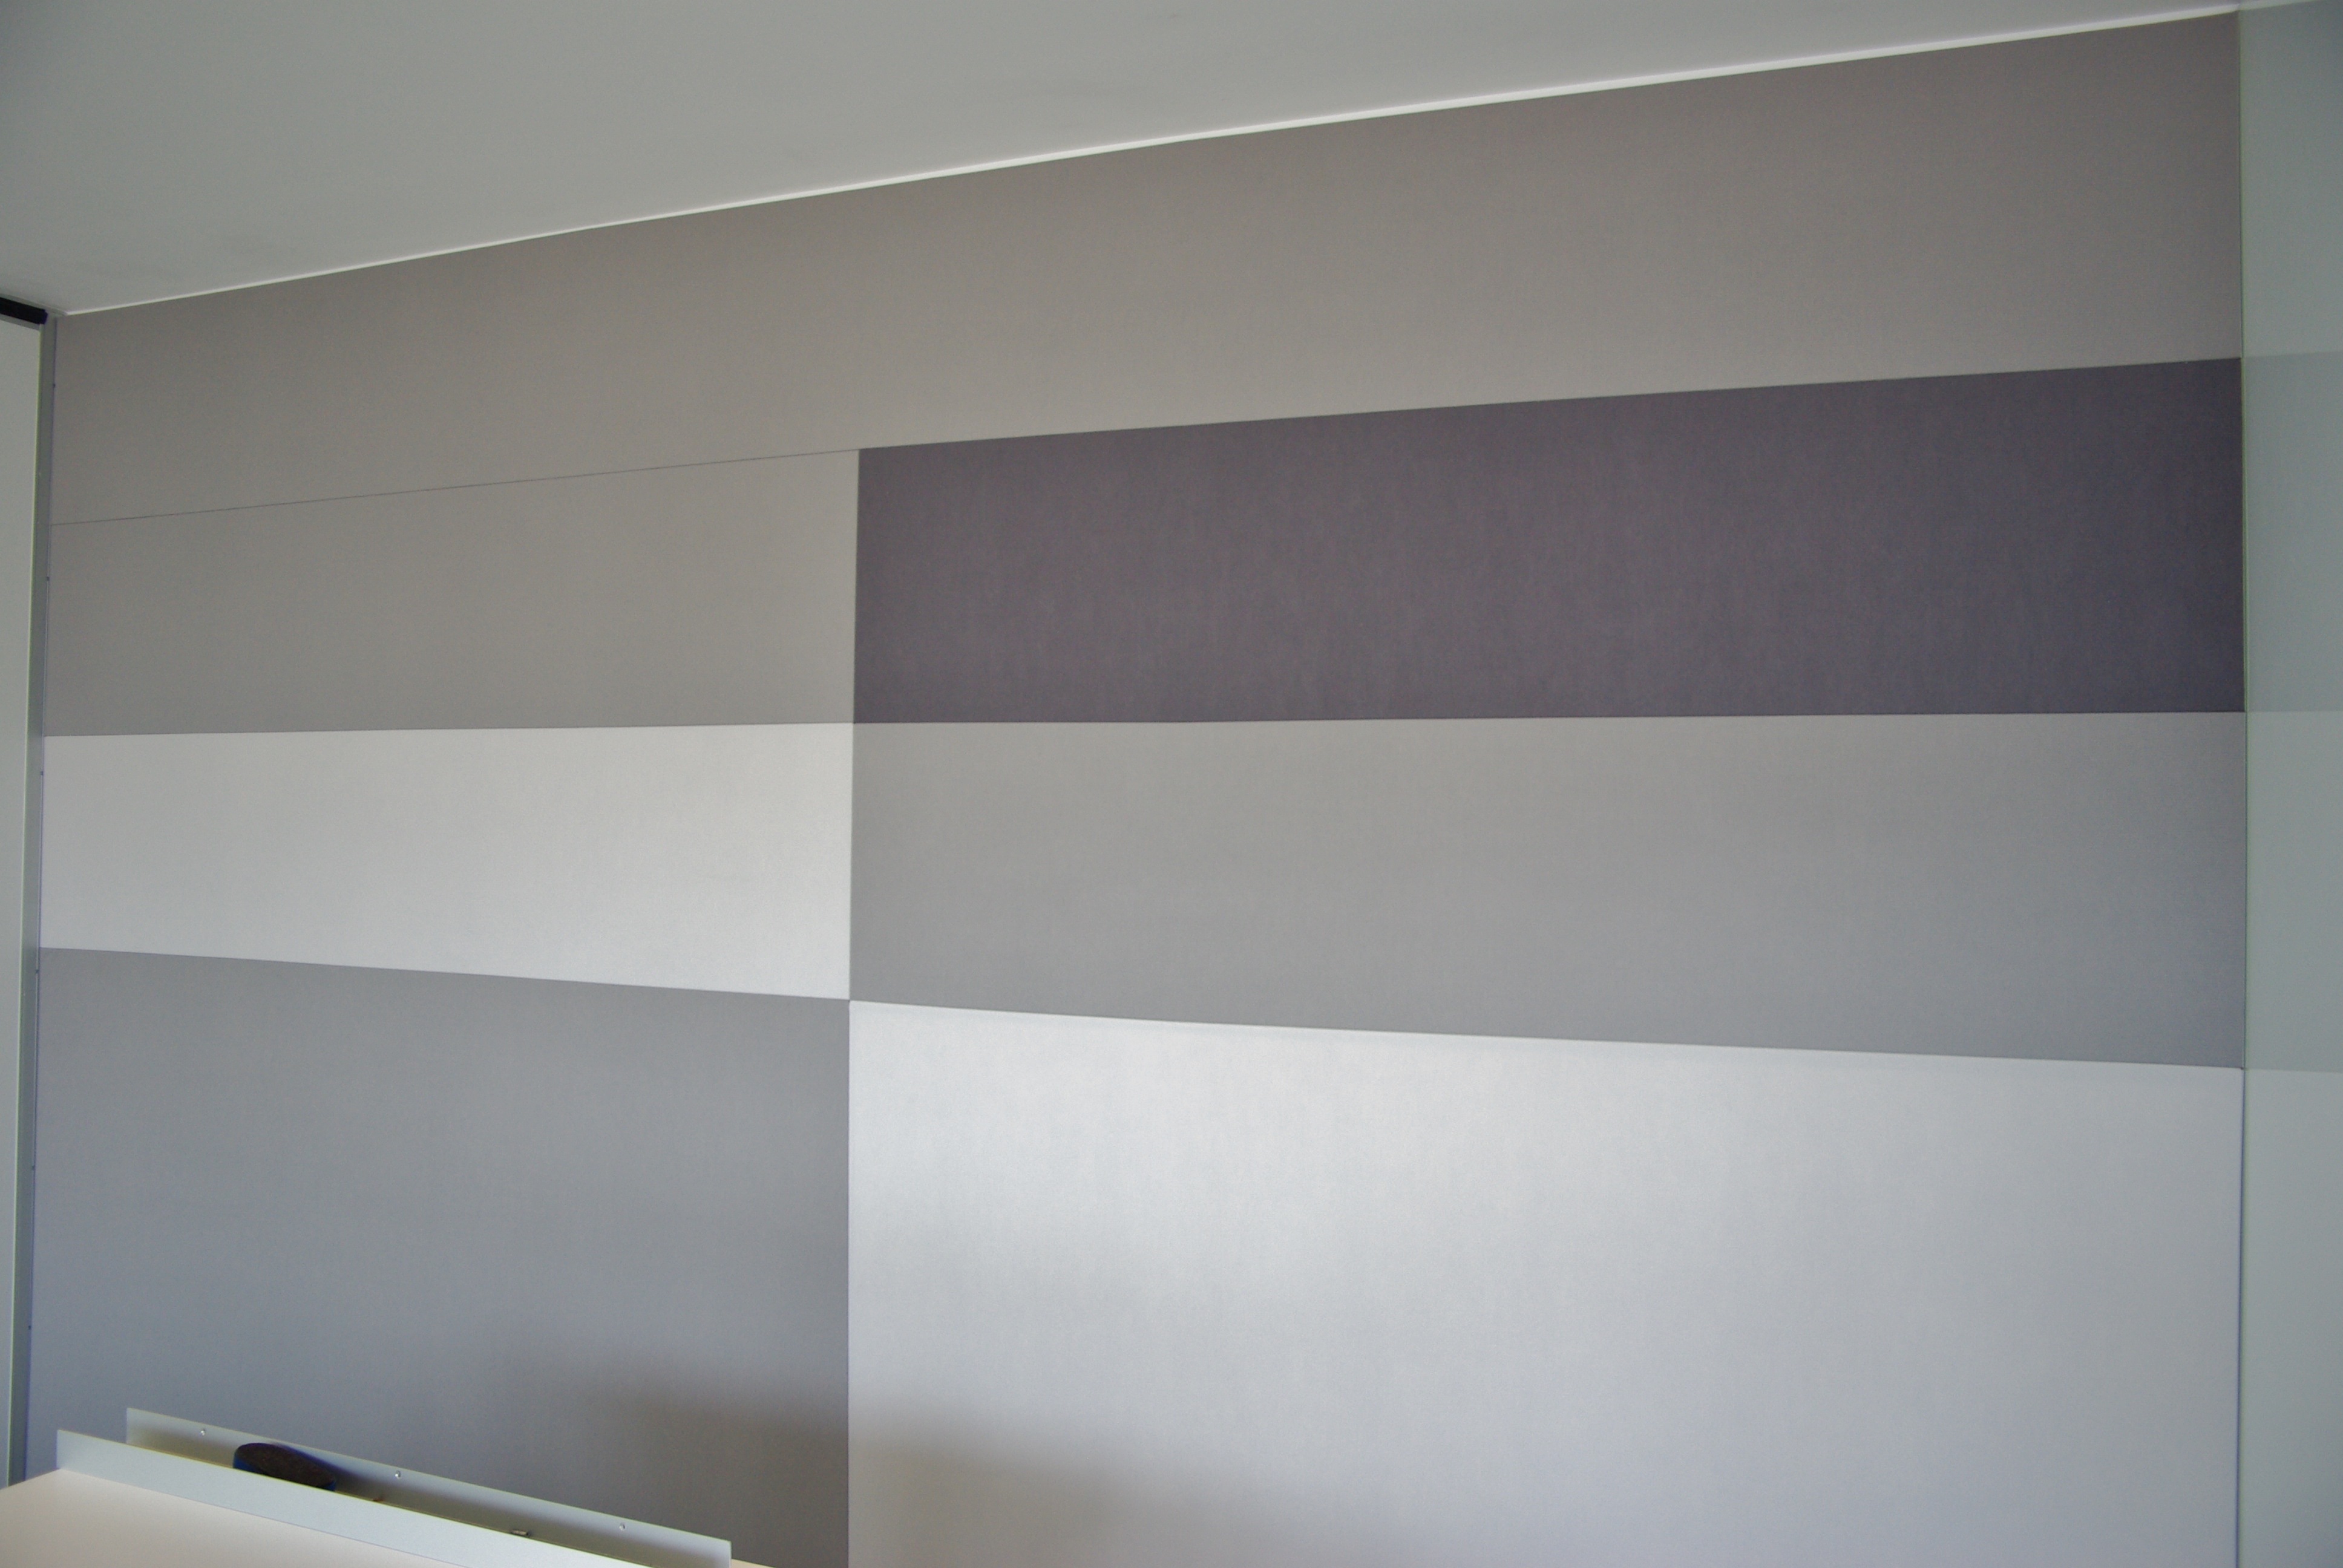 Enhance the Sound Quality of Your Office by Installing Suitable Acoustic Panels